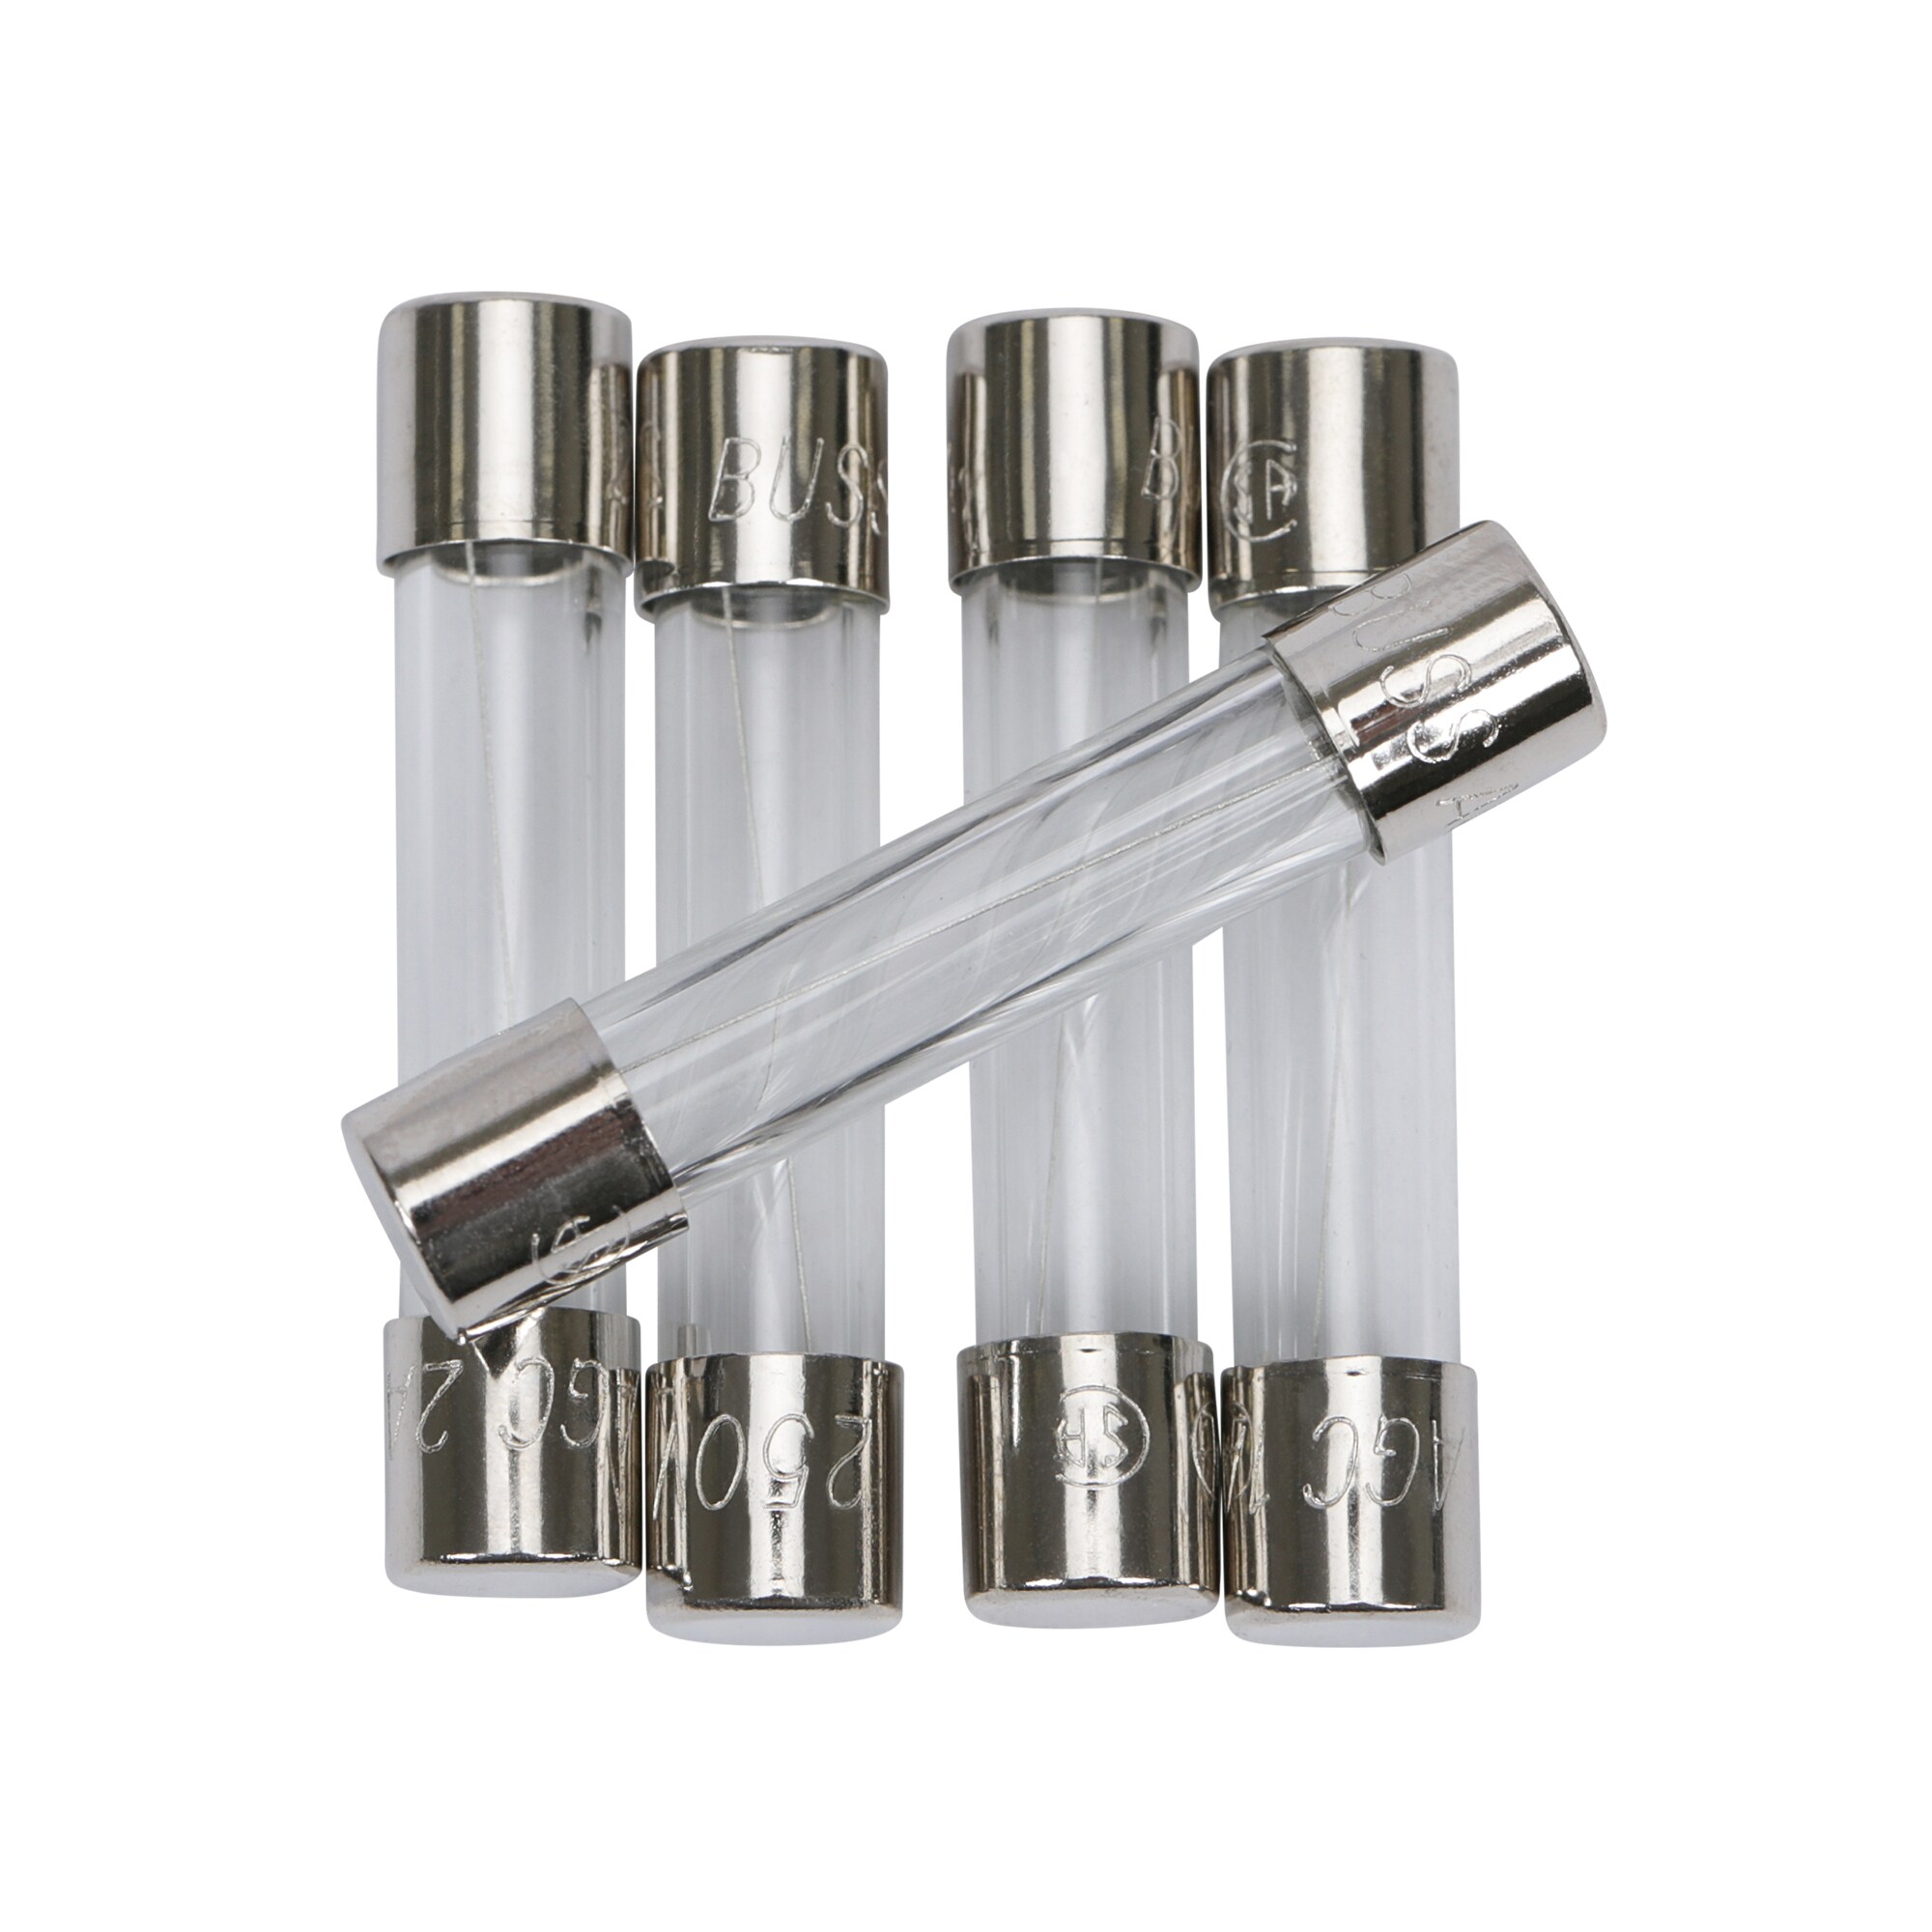 PIFCO Pack of 4 3A Fuses 250-750W 